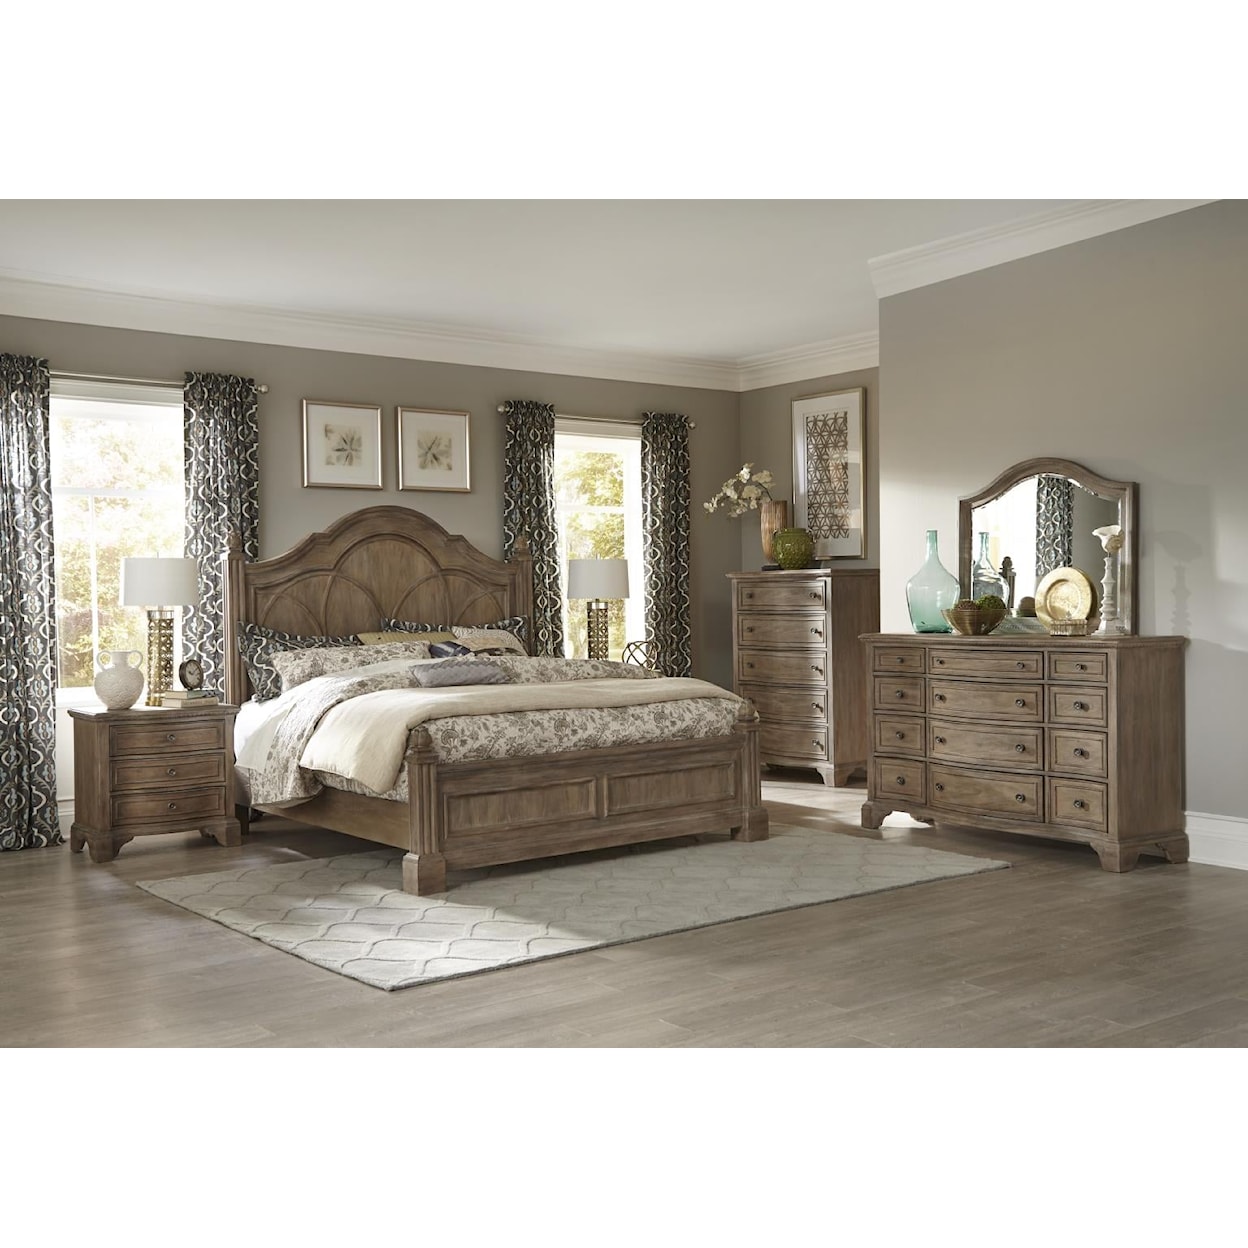 Trisha Yearwood Home Collection by Legacy Classic Jasper County 3-Drawer Nightstand